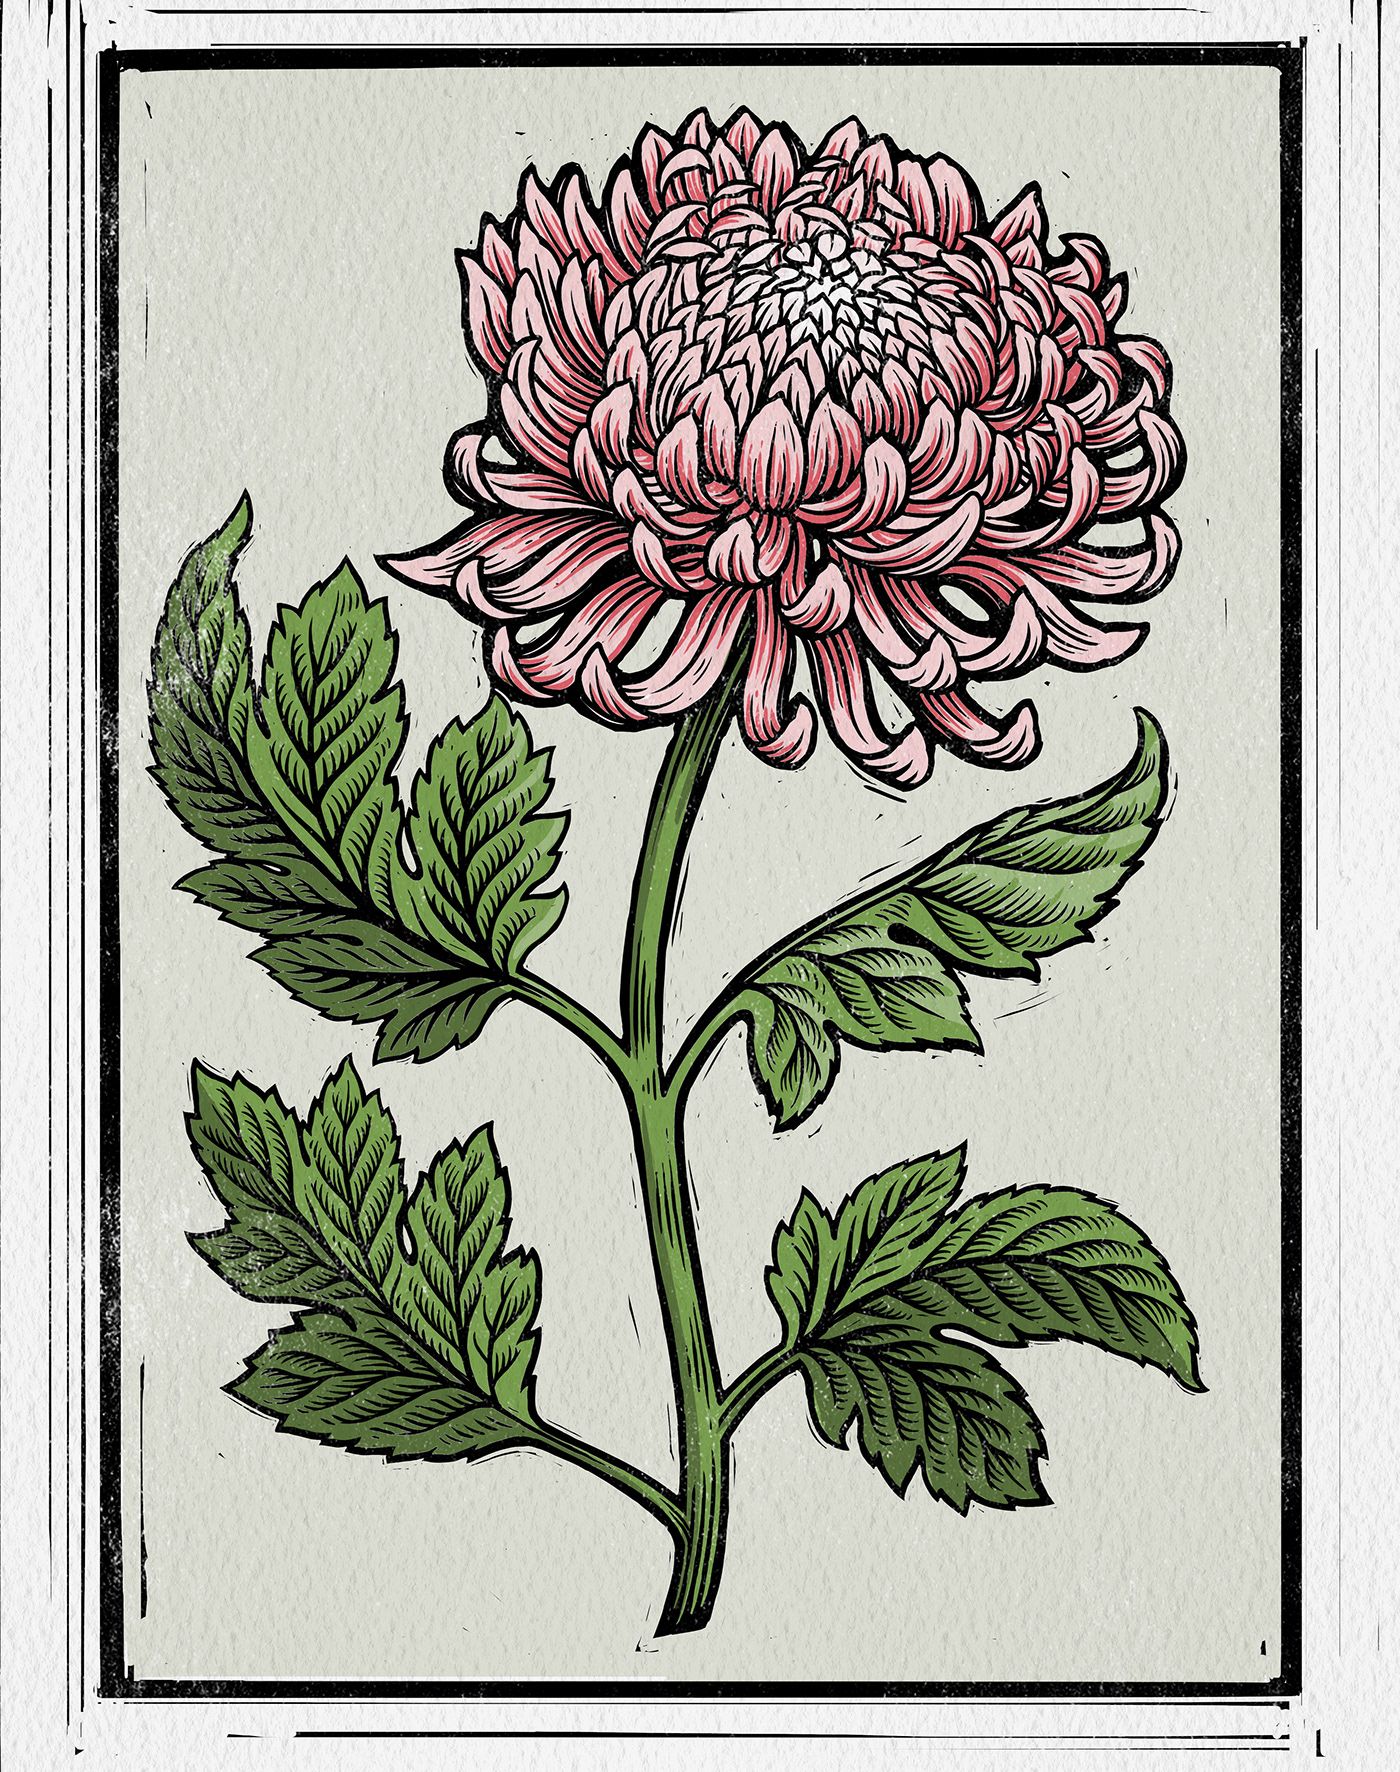 Flower Prints On Behance With Recent Flower Framed Art Prints (View 16 of 20)